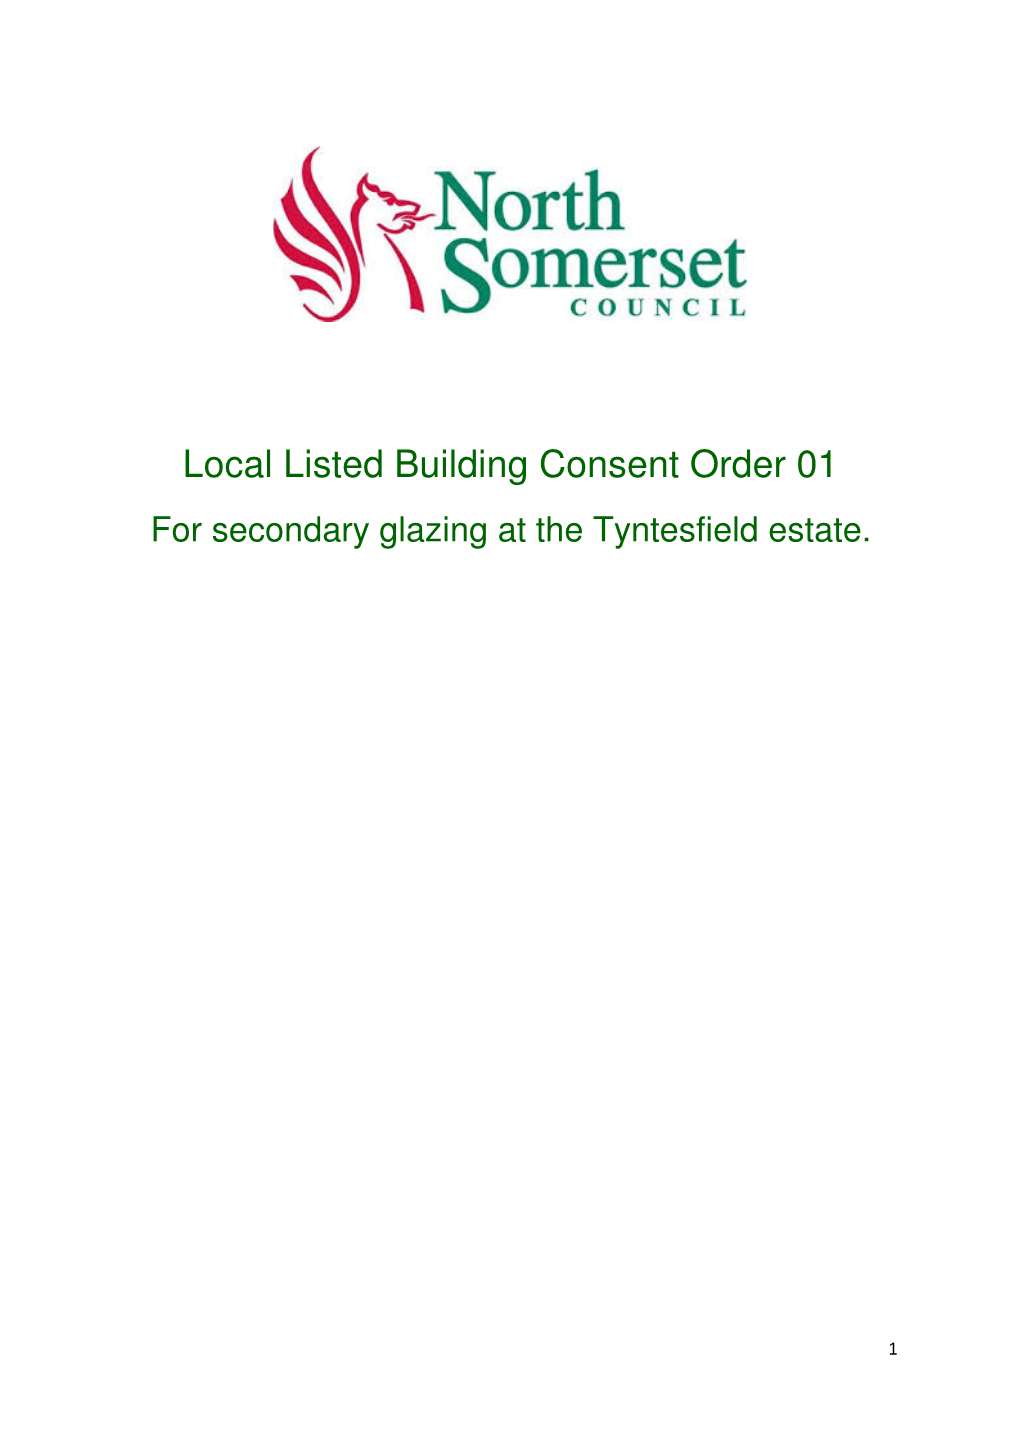 Local Listed Building Consent Order Secondary Glazing Tyntesfield